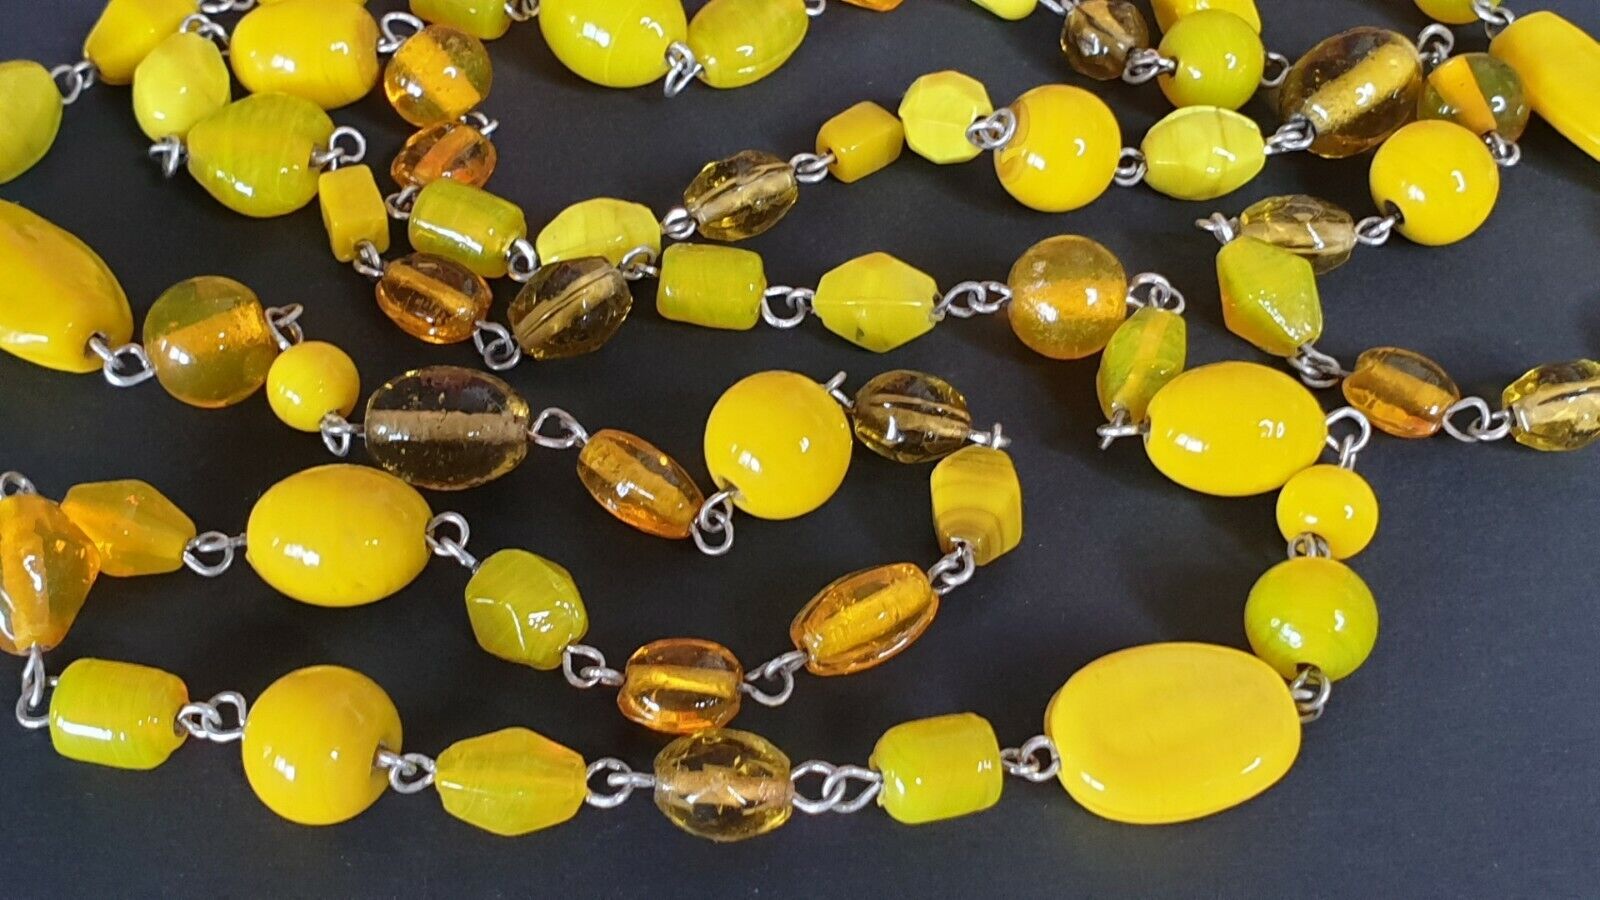 Asian Imported Costume Yellow Beaded Necklace …beautiful collection and accent p